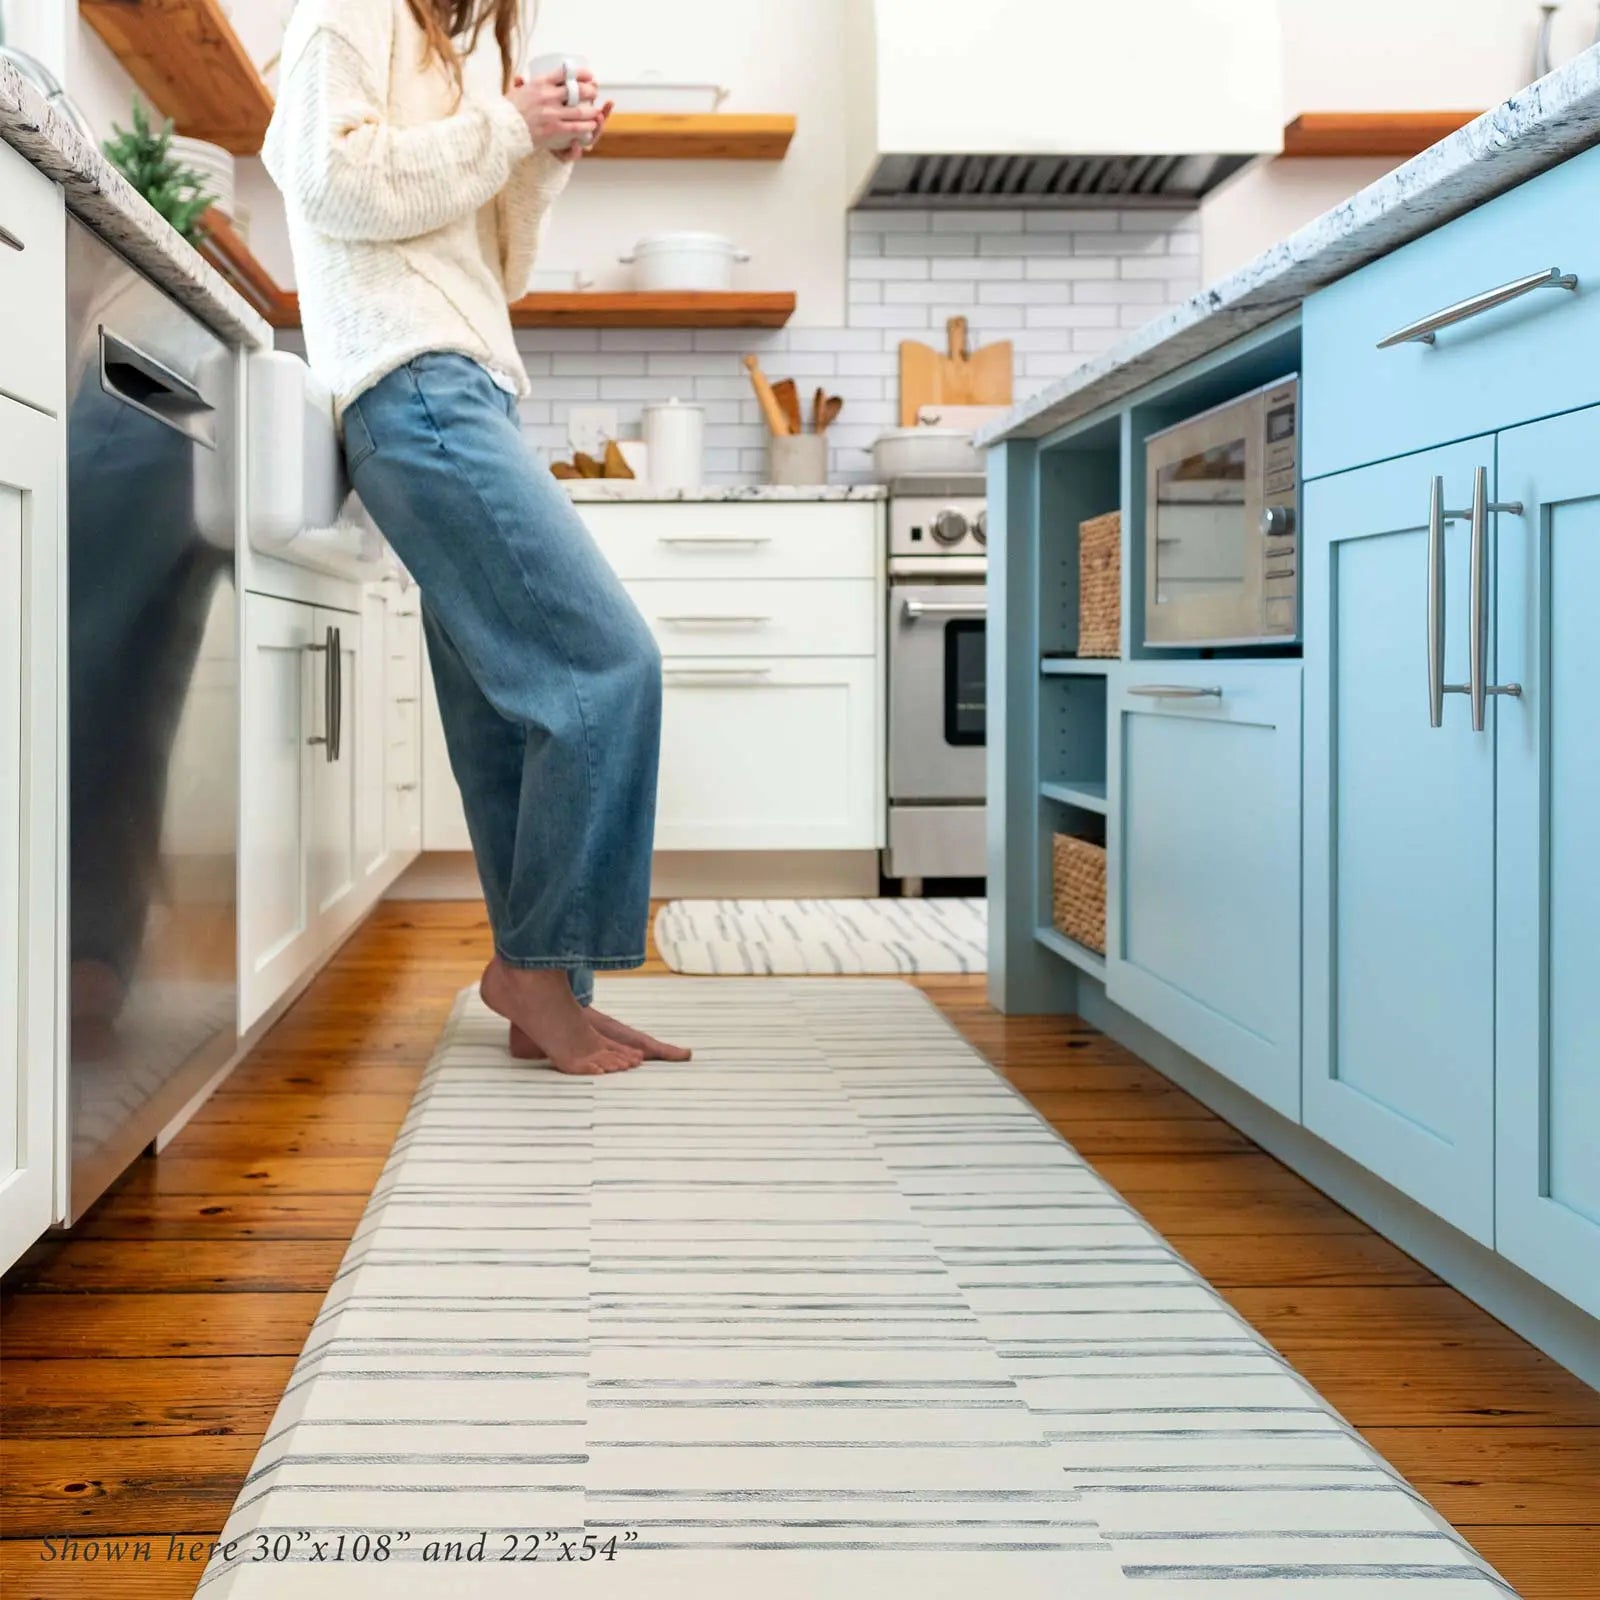 Gray and white inverted stripe kitchen mat shown with woman in kitchen drinking a cup of coffee standing on size 30x108